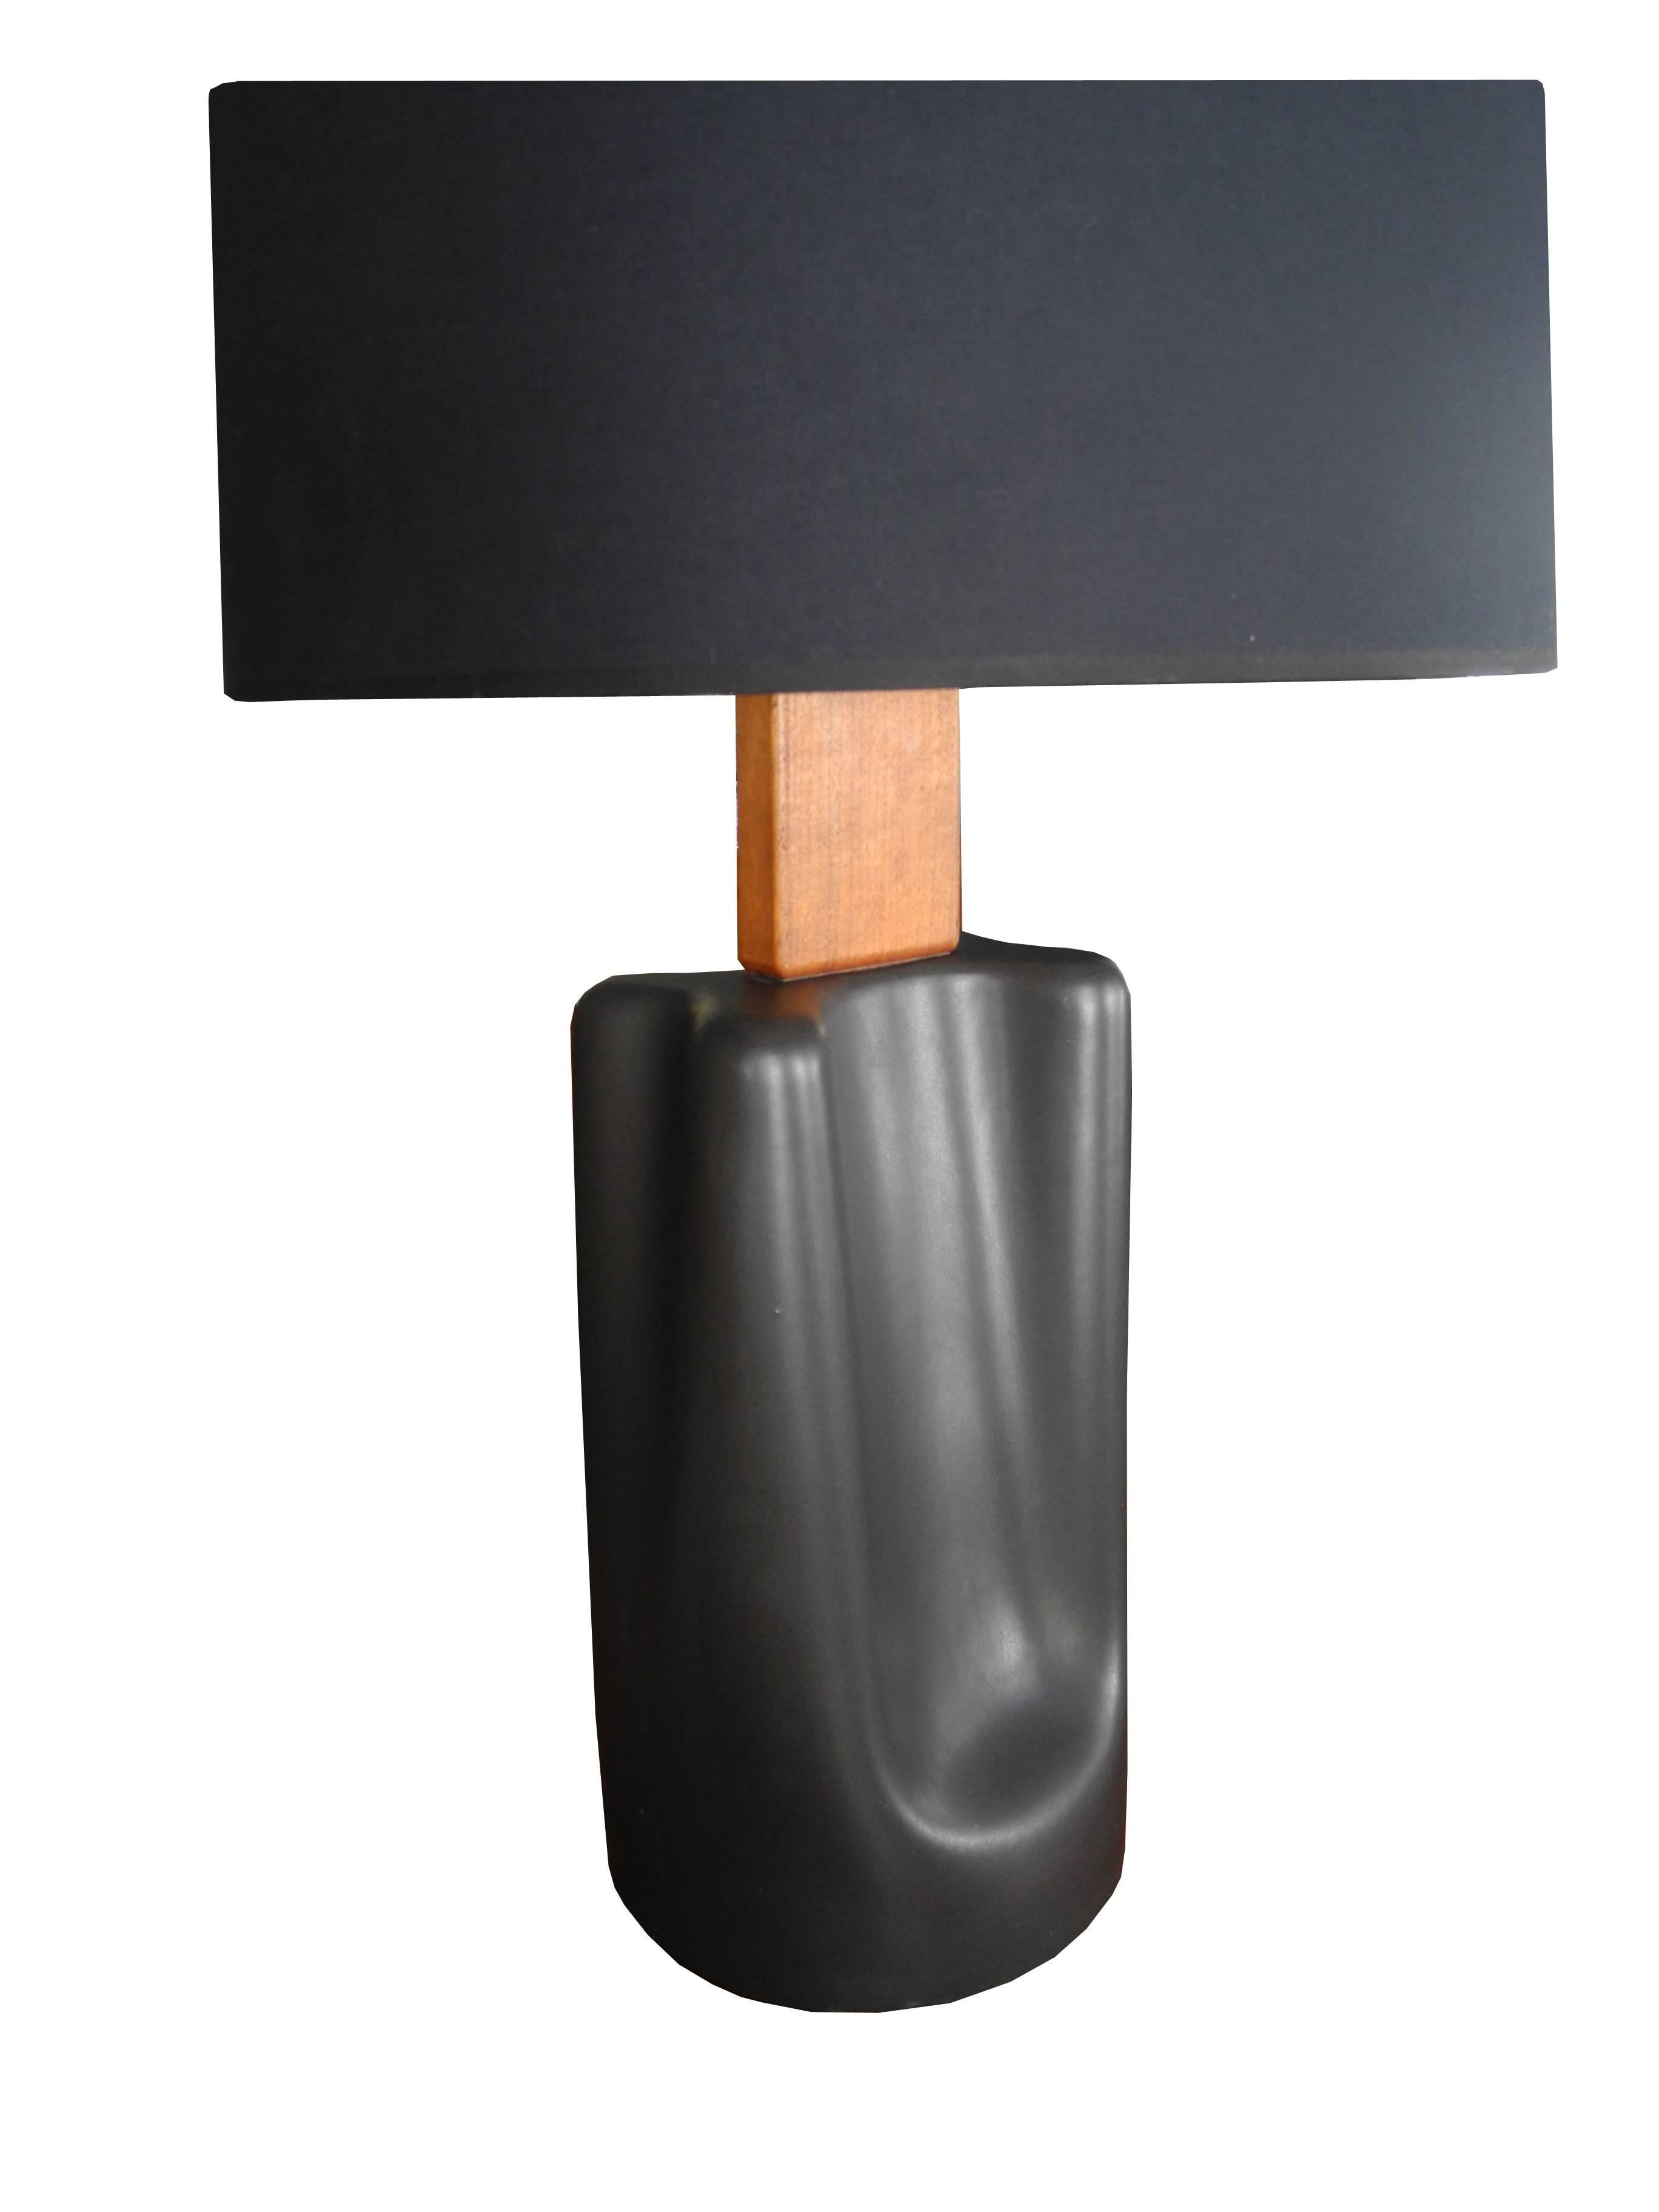 This beautifully shaped and exquisitely glazed in gray gun-metal, ceramic lamp, is topped with a block of solid teak at the neck. Beautiful lines, shape and use of different materials. The height of 31